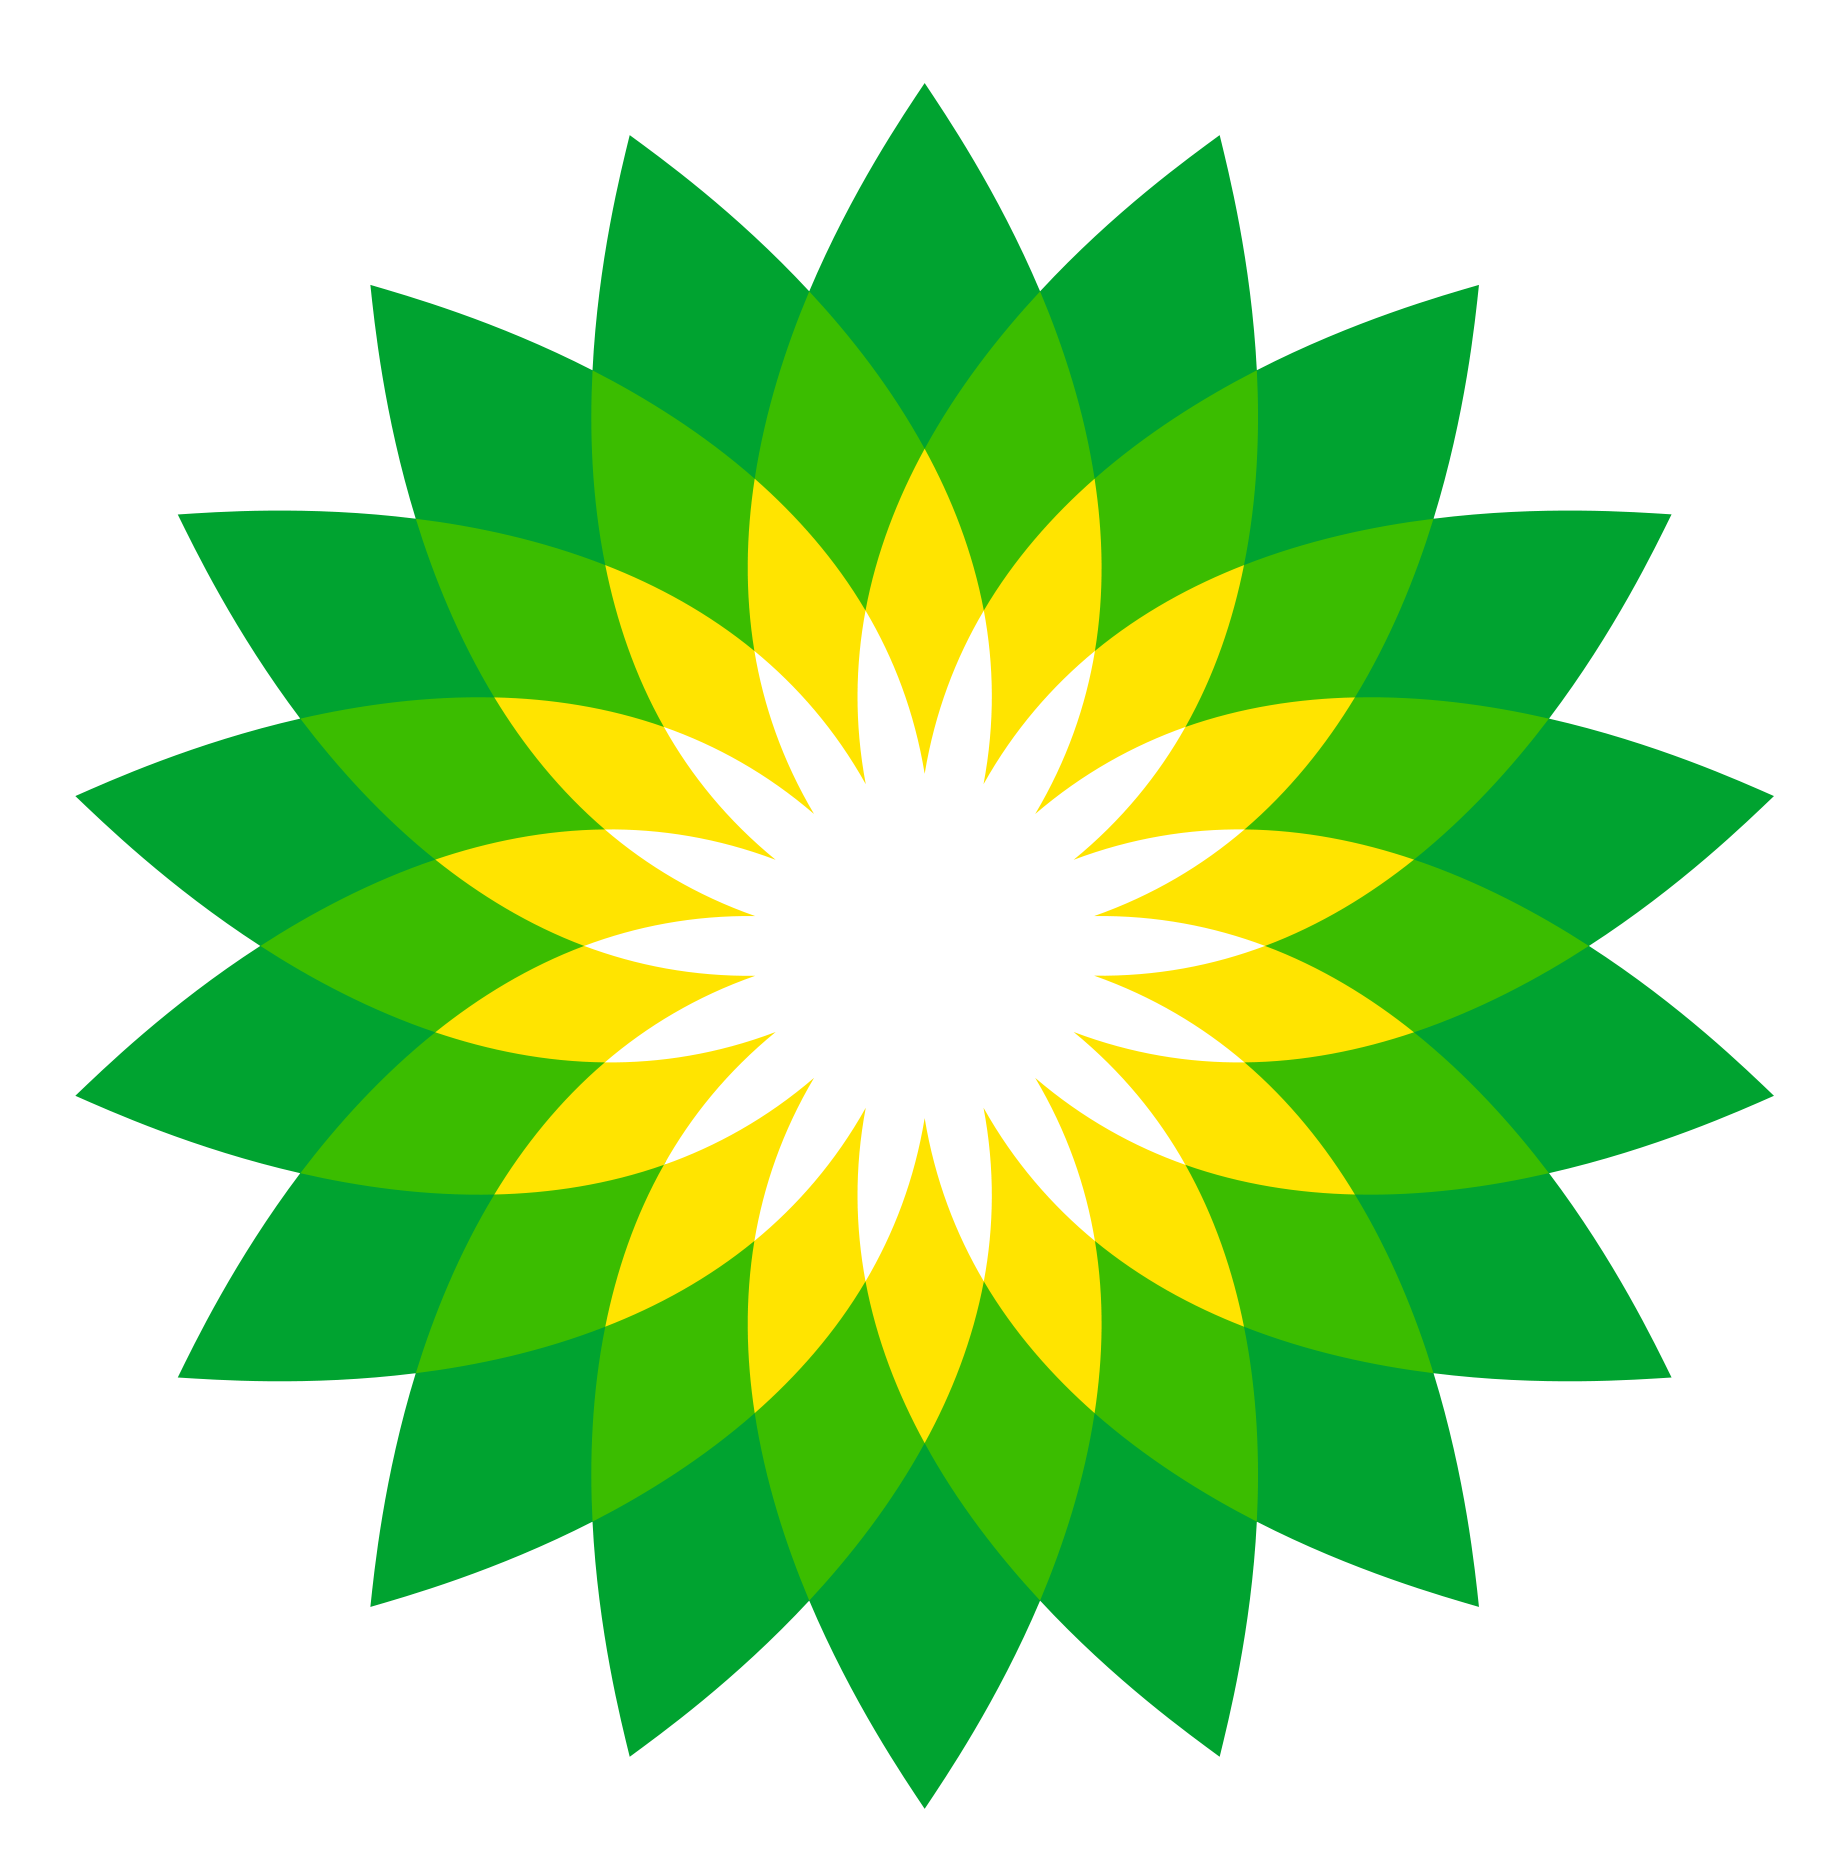 Green and Yellow Starburst Logo - IP Australia rejects BP's green colour mark application. Managing